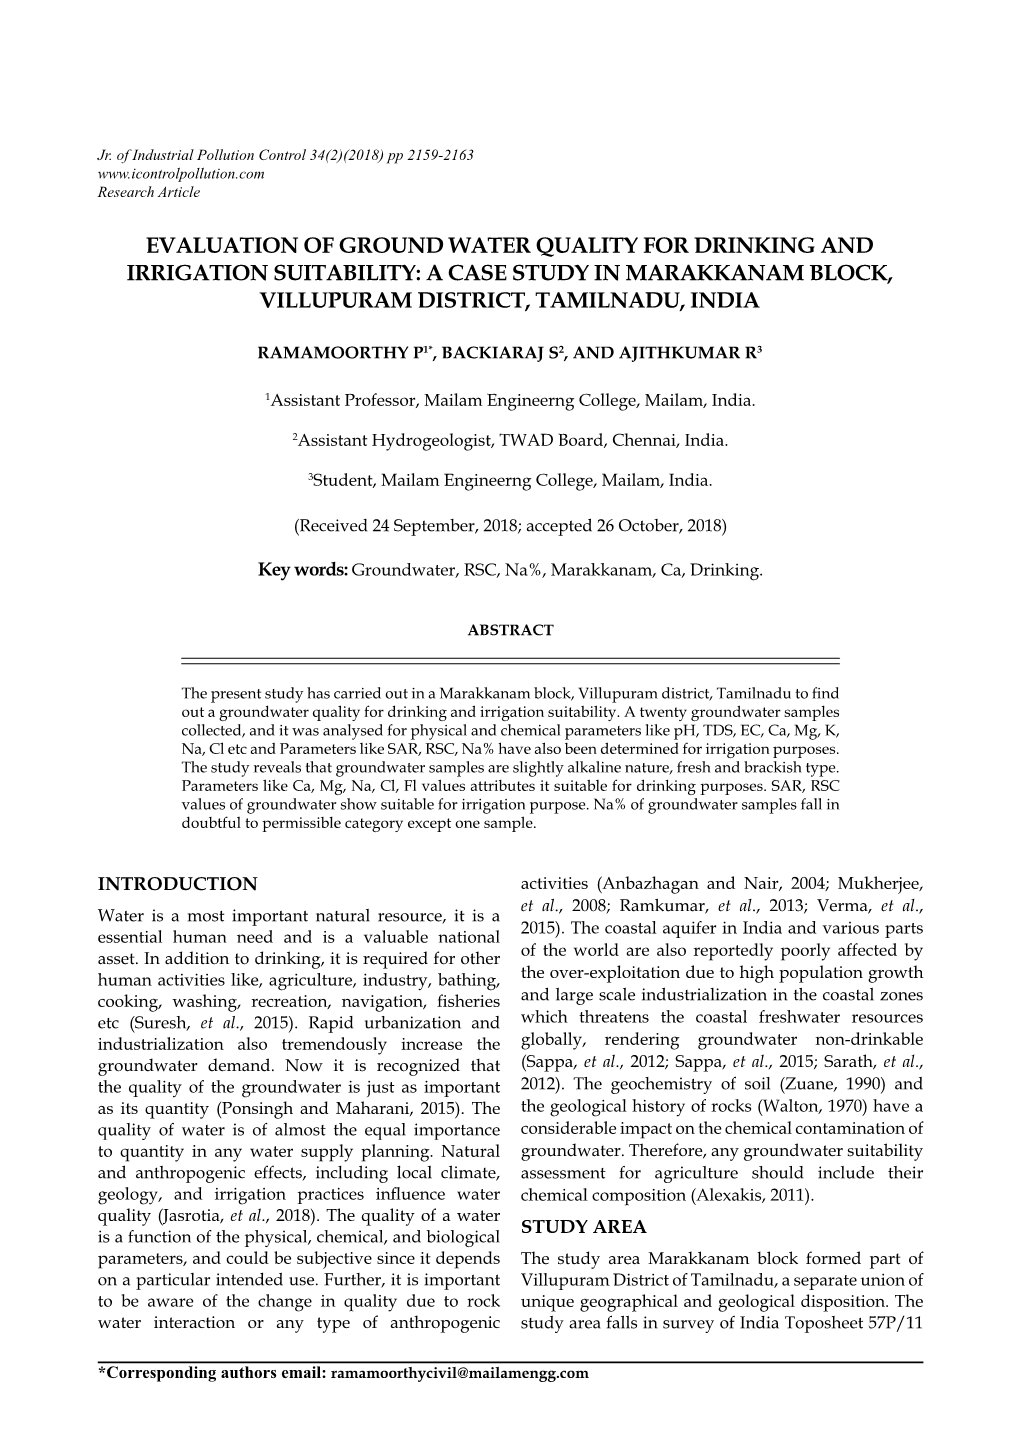 Evaluation of Ground Water Quality for Drinking and Irrigation Suitability: a Case Study in Marakkanam Block, Villupuram District, Tamilnadu, India